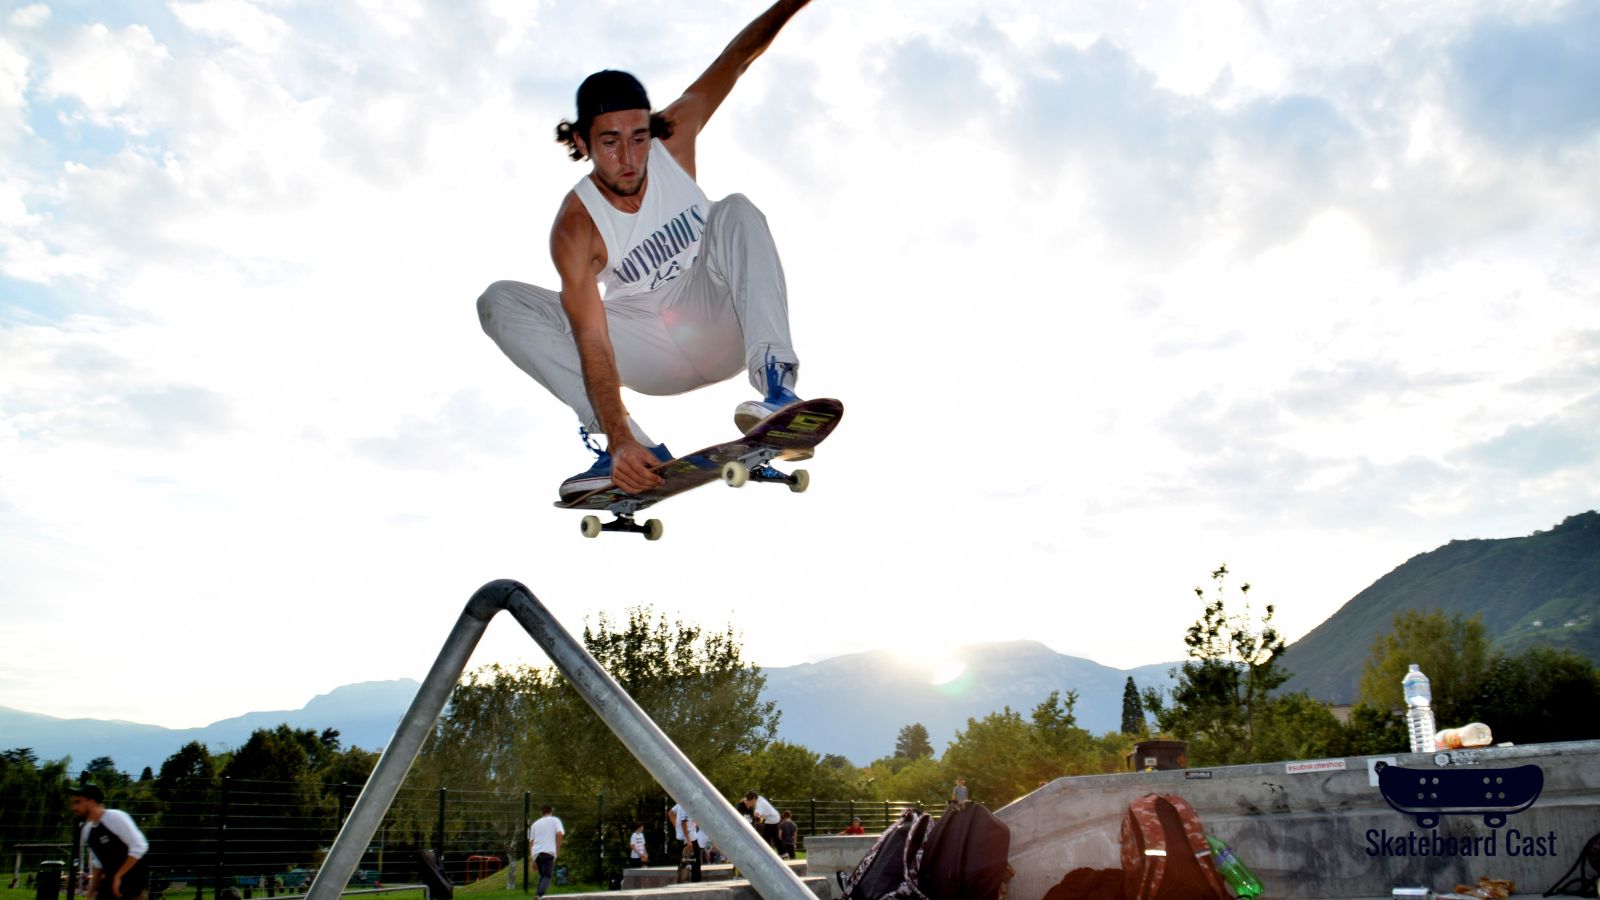 A skateboarder doing a trick in the air on their skateboard.